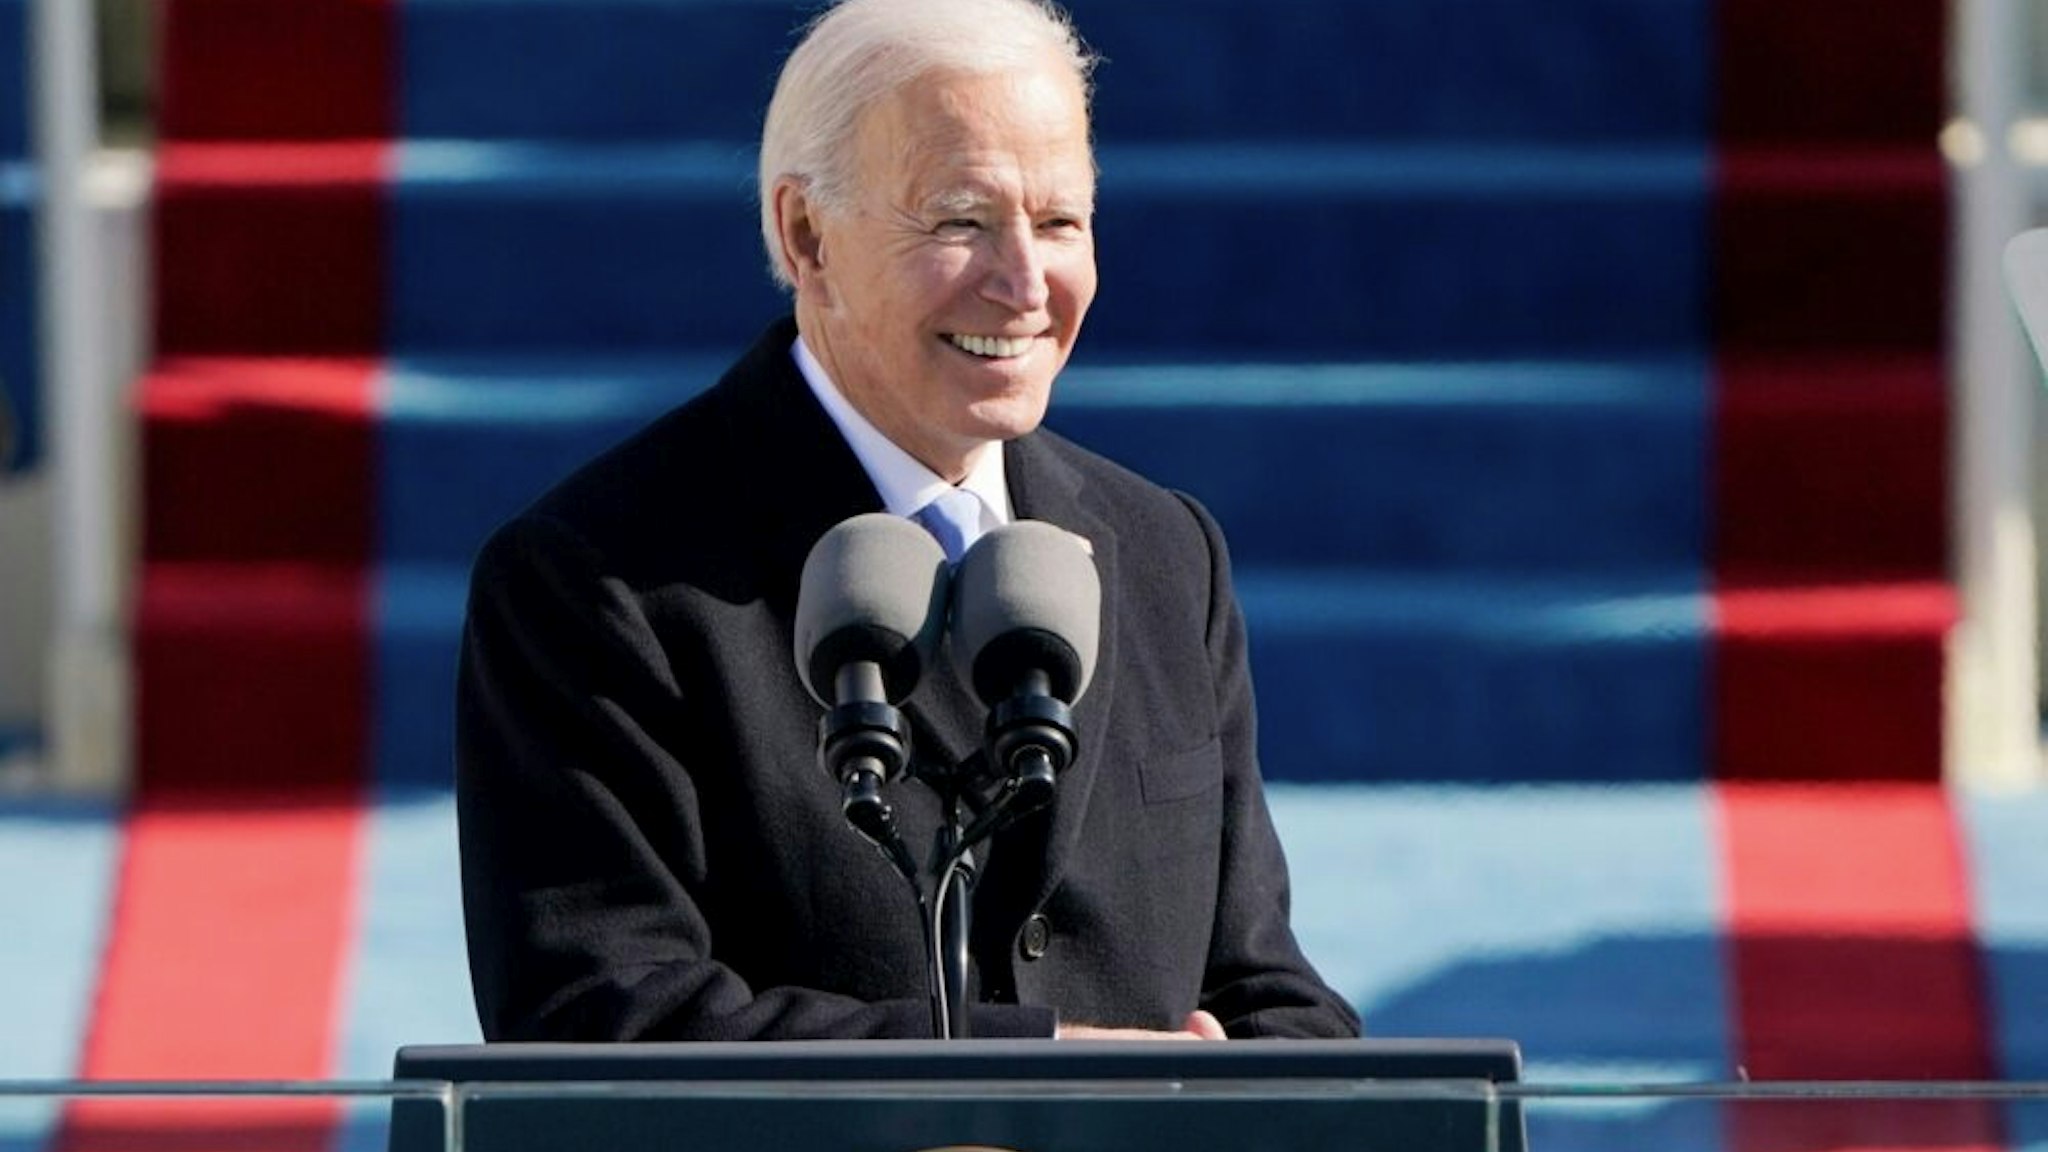 TOPSHOT - US President Joe Biden delivers his Inauguration speech after being sworn in as the 46th US President on January 20, 2021, at the US Capitol in Washington, DC.